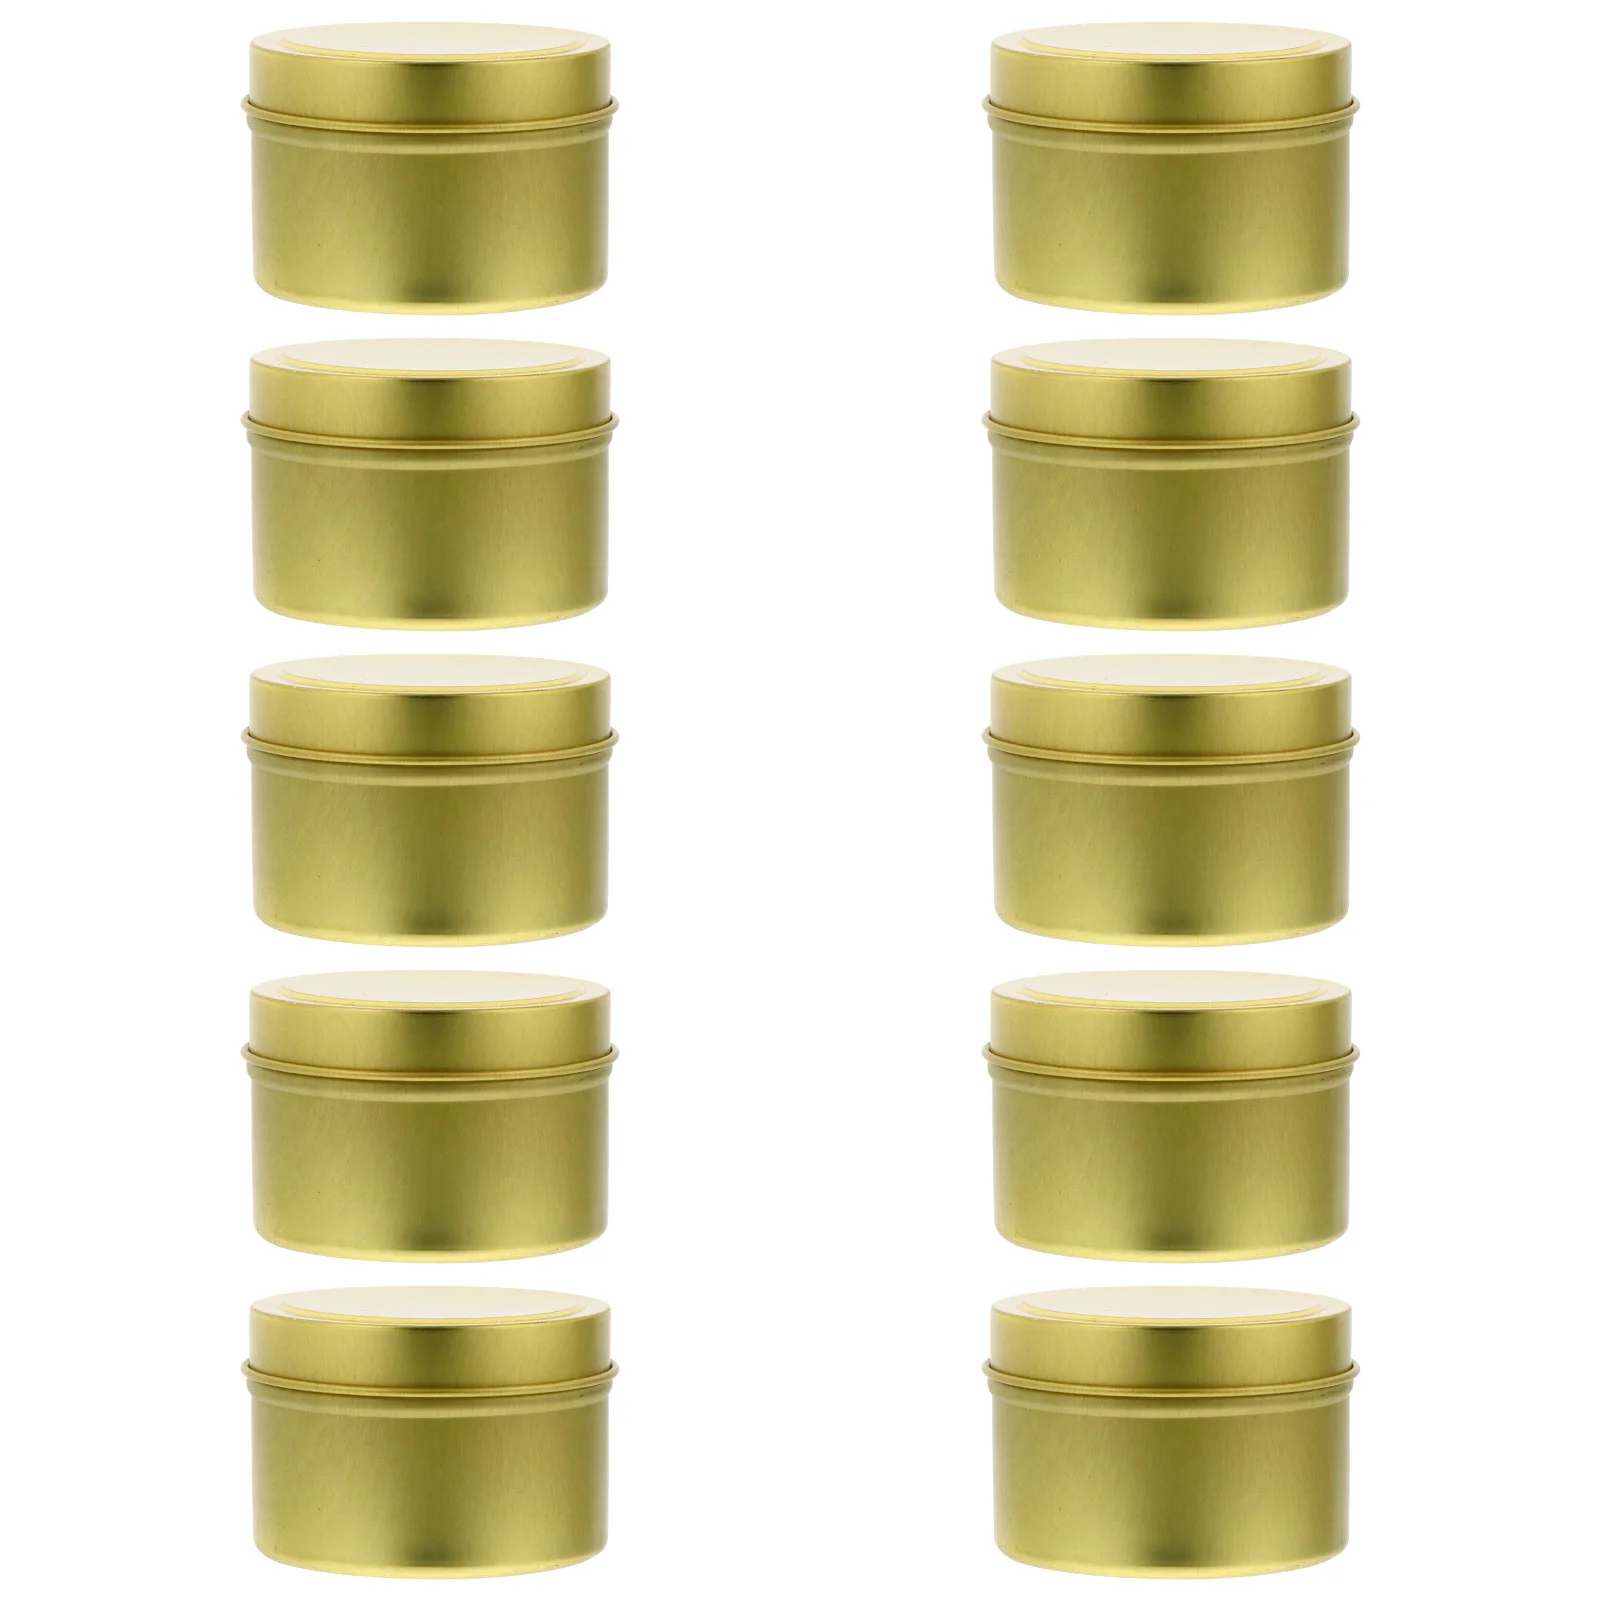 

Jars Storage Jar Making Tin Can Candy Tins Tinplate Boxes Supplies Holder Lids Aromatherapy Box Jewelry Christmas Cans Gift